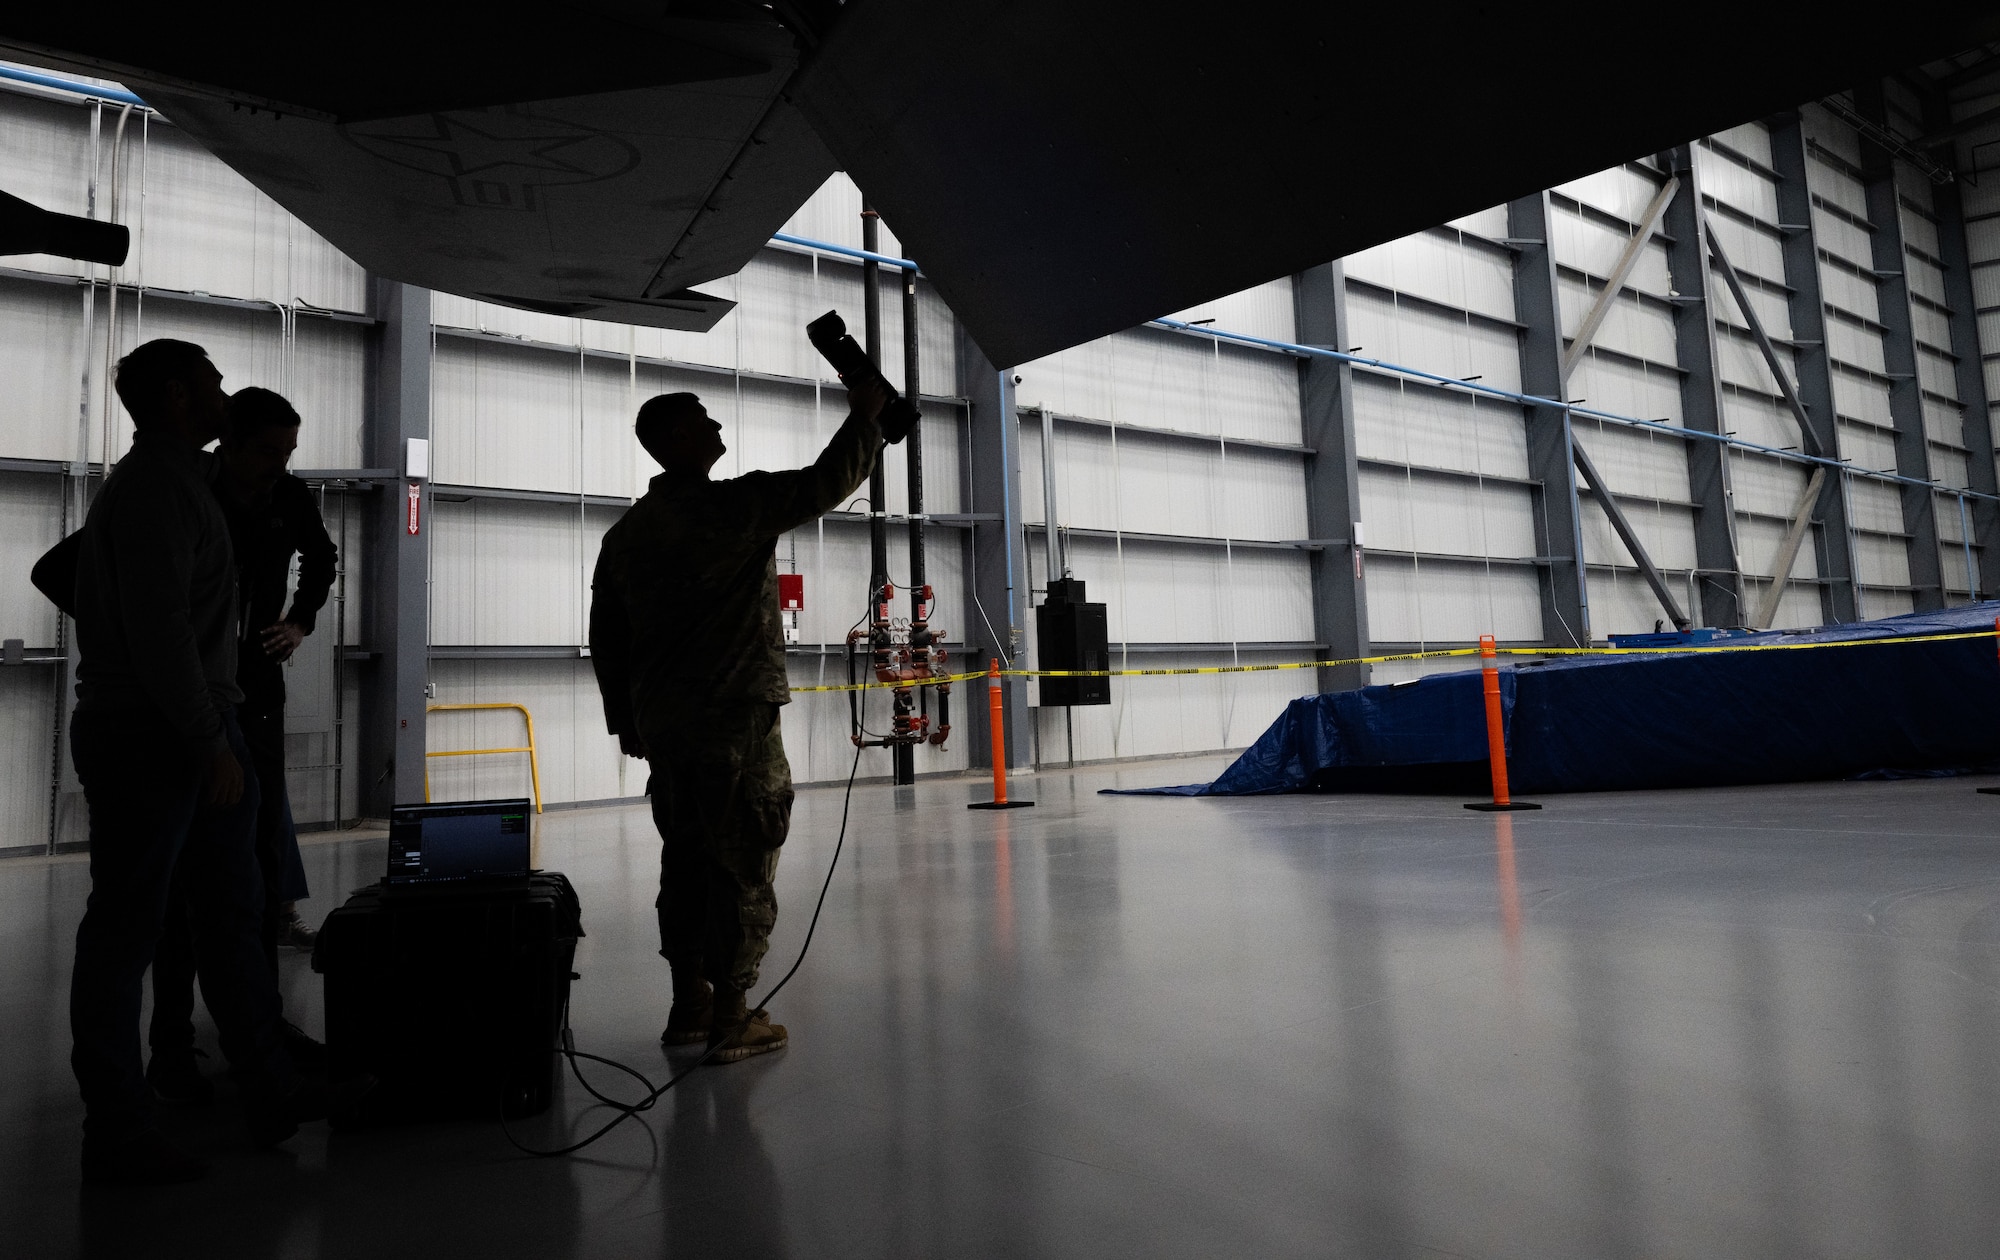 Master Sgt. James Goerss, 76th Aircraft Maintenance Group aircraft structural section chief, scans a wing flap on a KC-135 Stratotanker during STRATO-Tech, a convention for the sustainment of the KC-135 Stratotanker, April 22, 2024, in Wichita, Kansas. STRATO-Tech aims to bring the U.S. Air Force together with outside agencies to collaborate on innovative technology for the KC-135. (U.S. Air Force photo by Staff Sgt. Tryphena Mayhugh)